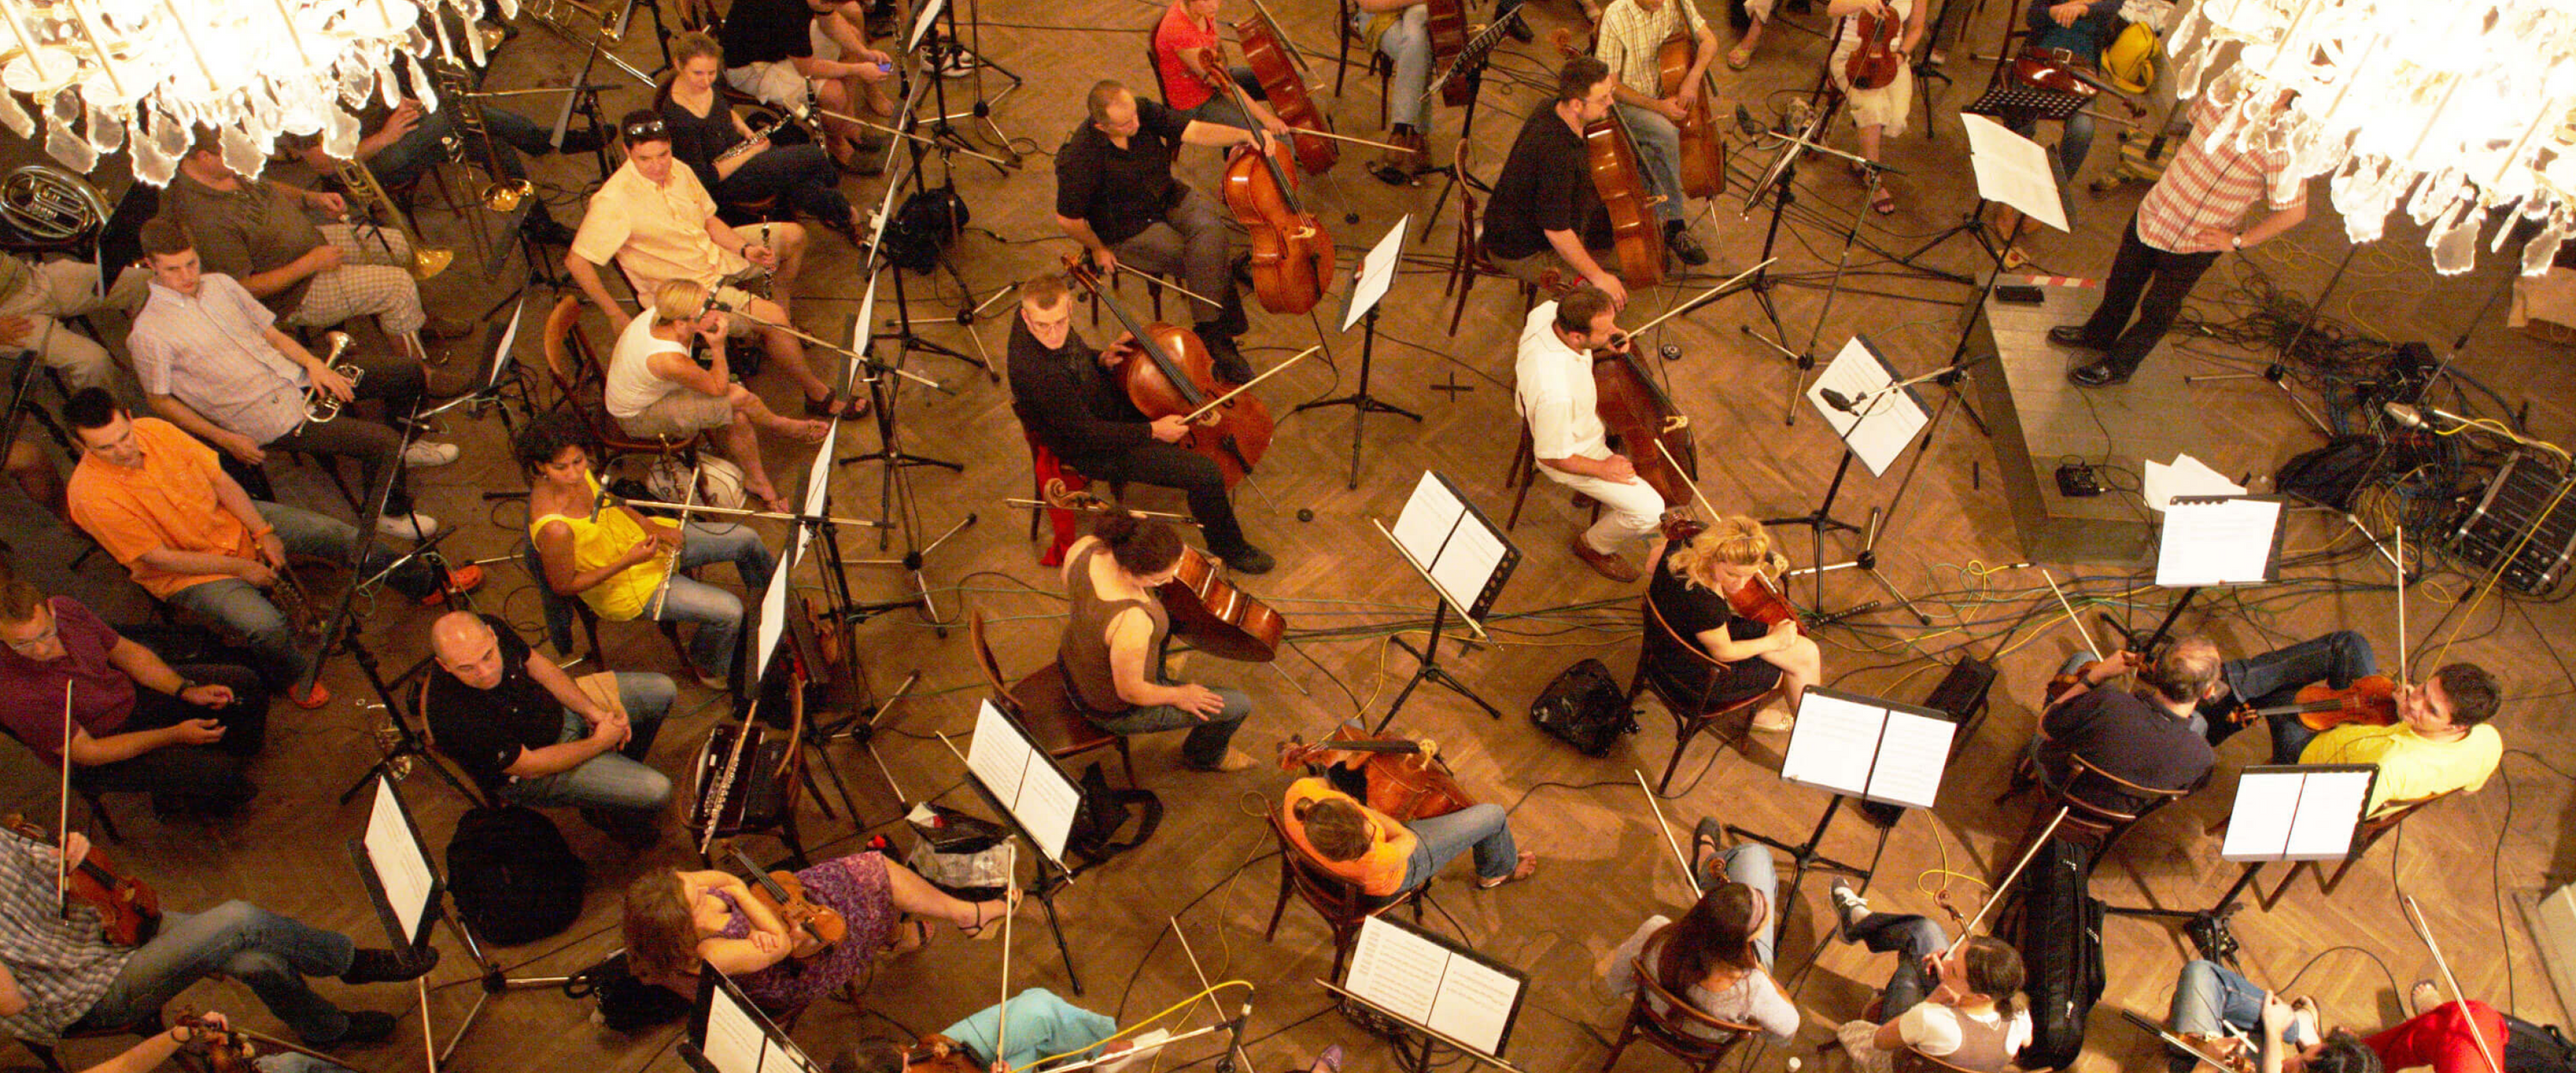 Brilliant acoustics for concerts and sound recordings